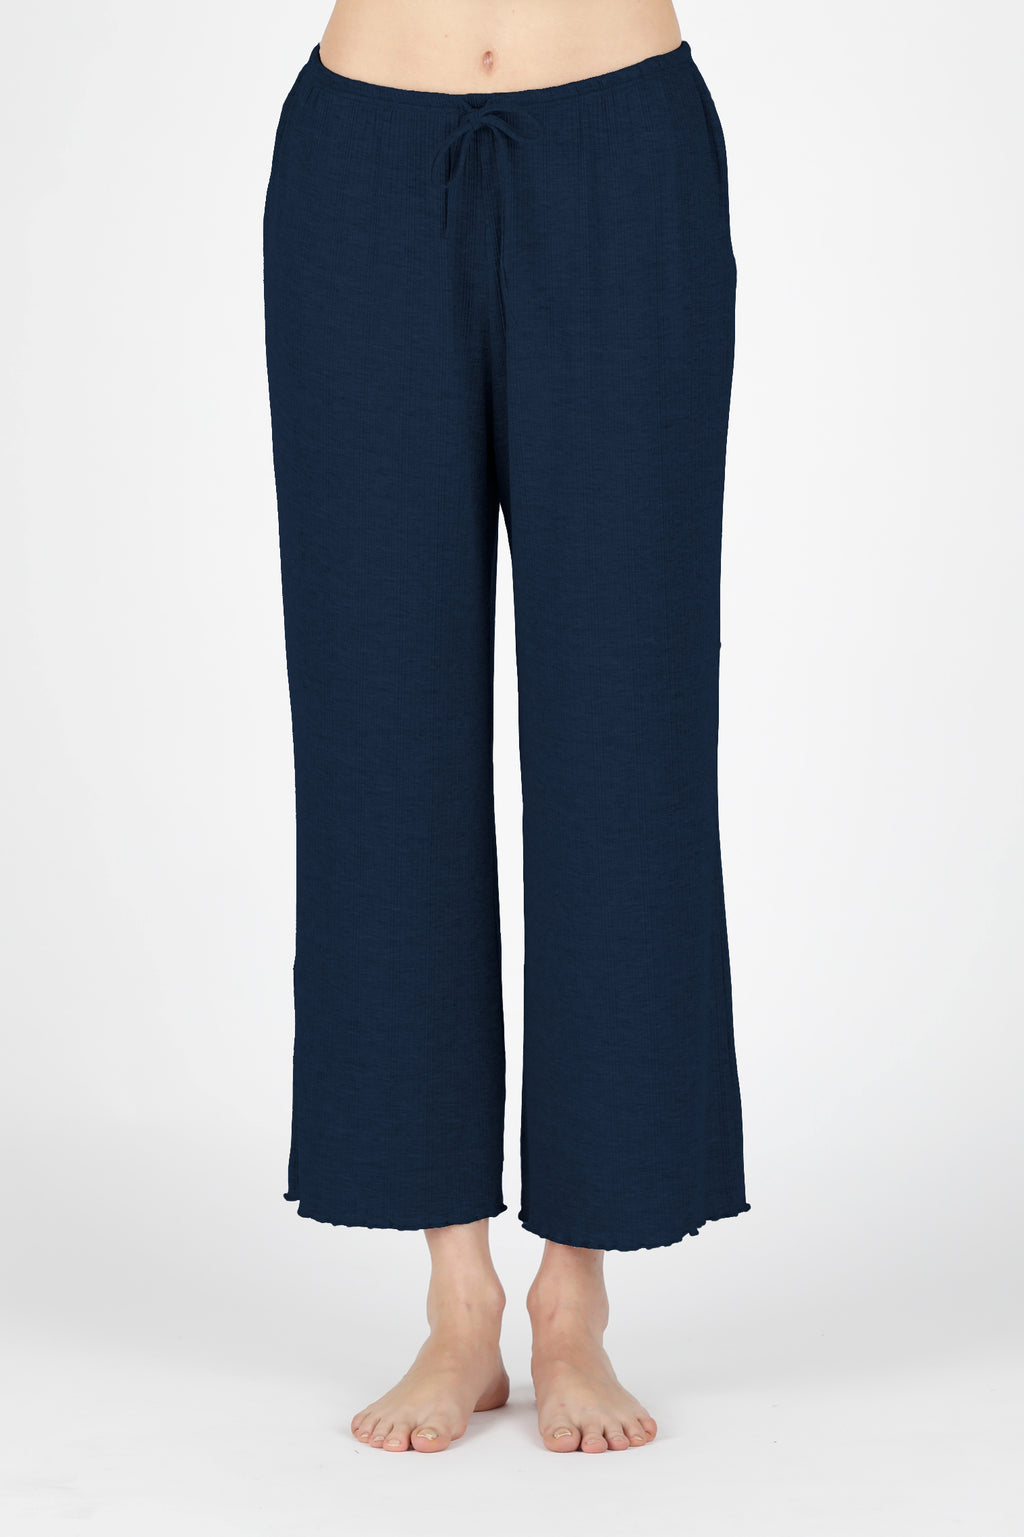 Sustainably Chic Lounging Pant - Navy